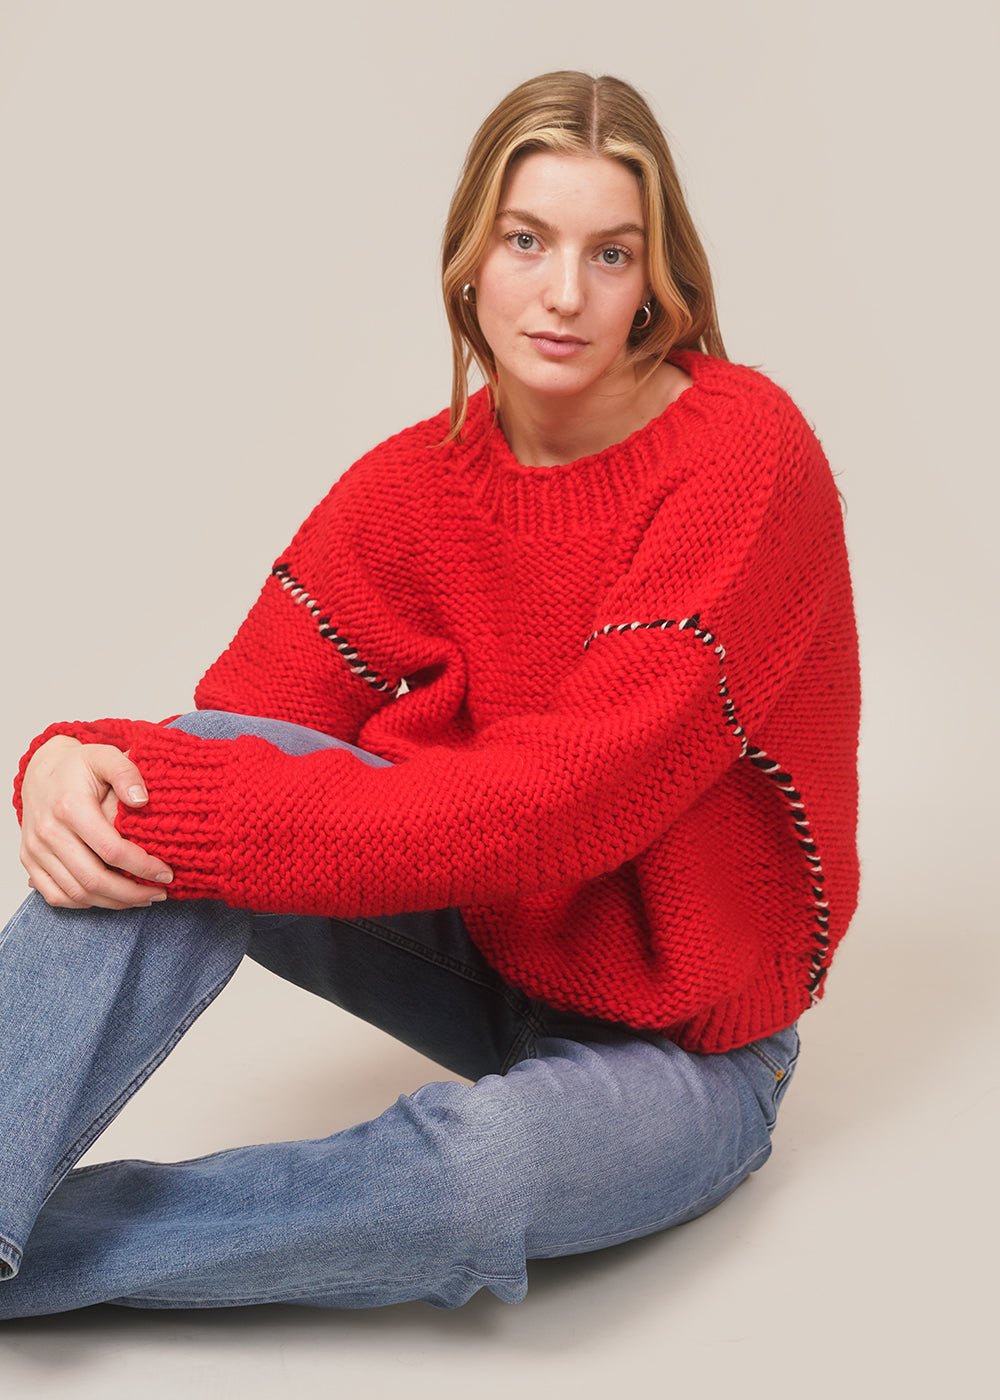 Deconstructed Sweater in Red by FRISSON KNITS – New Classics Studios